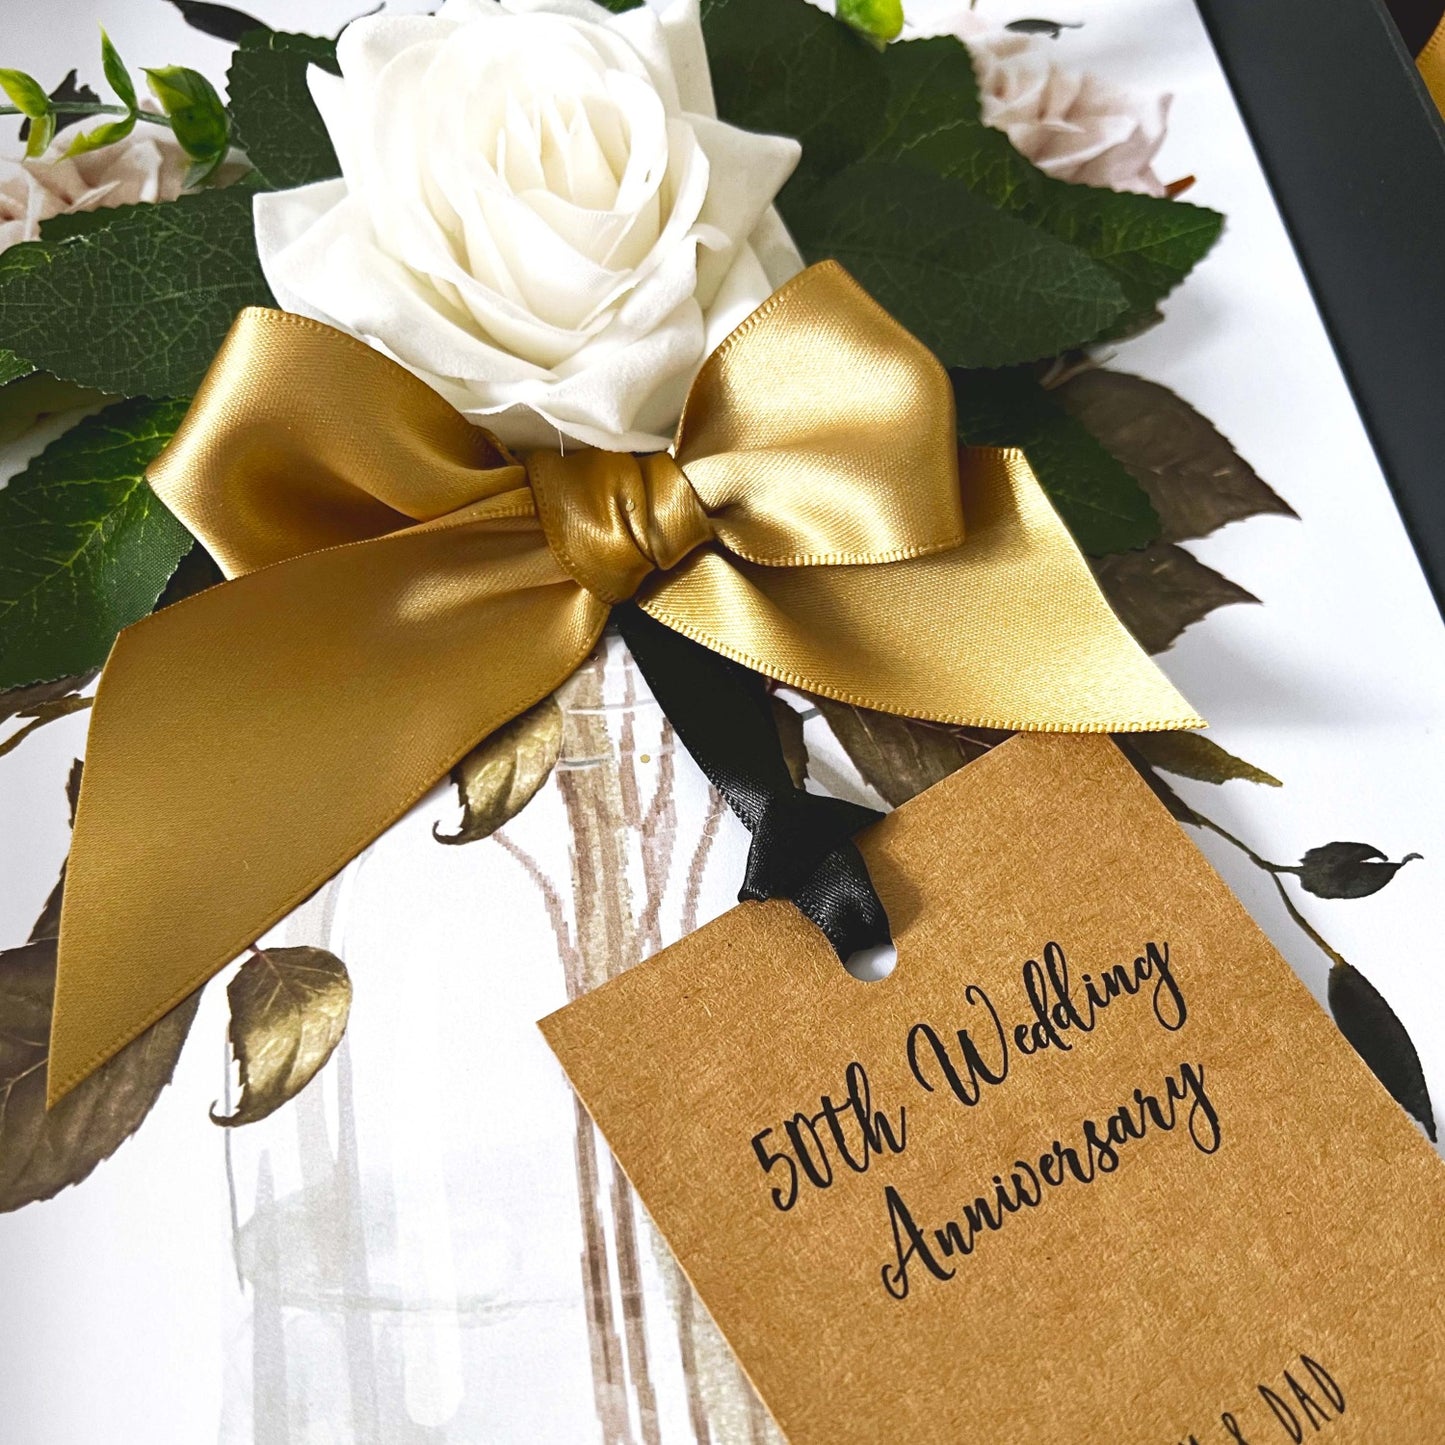 Luxury 50th wedding anniversary cards in gold and ivory